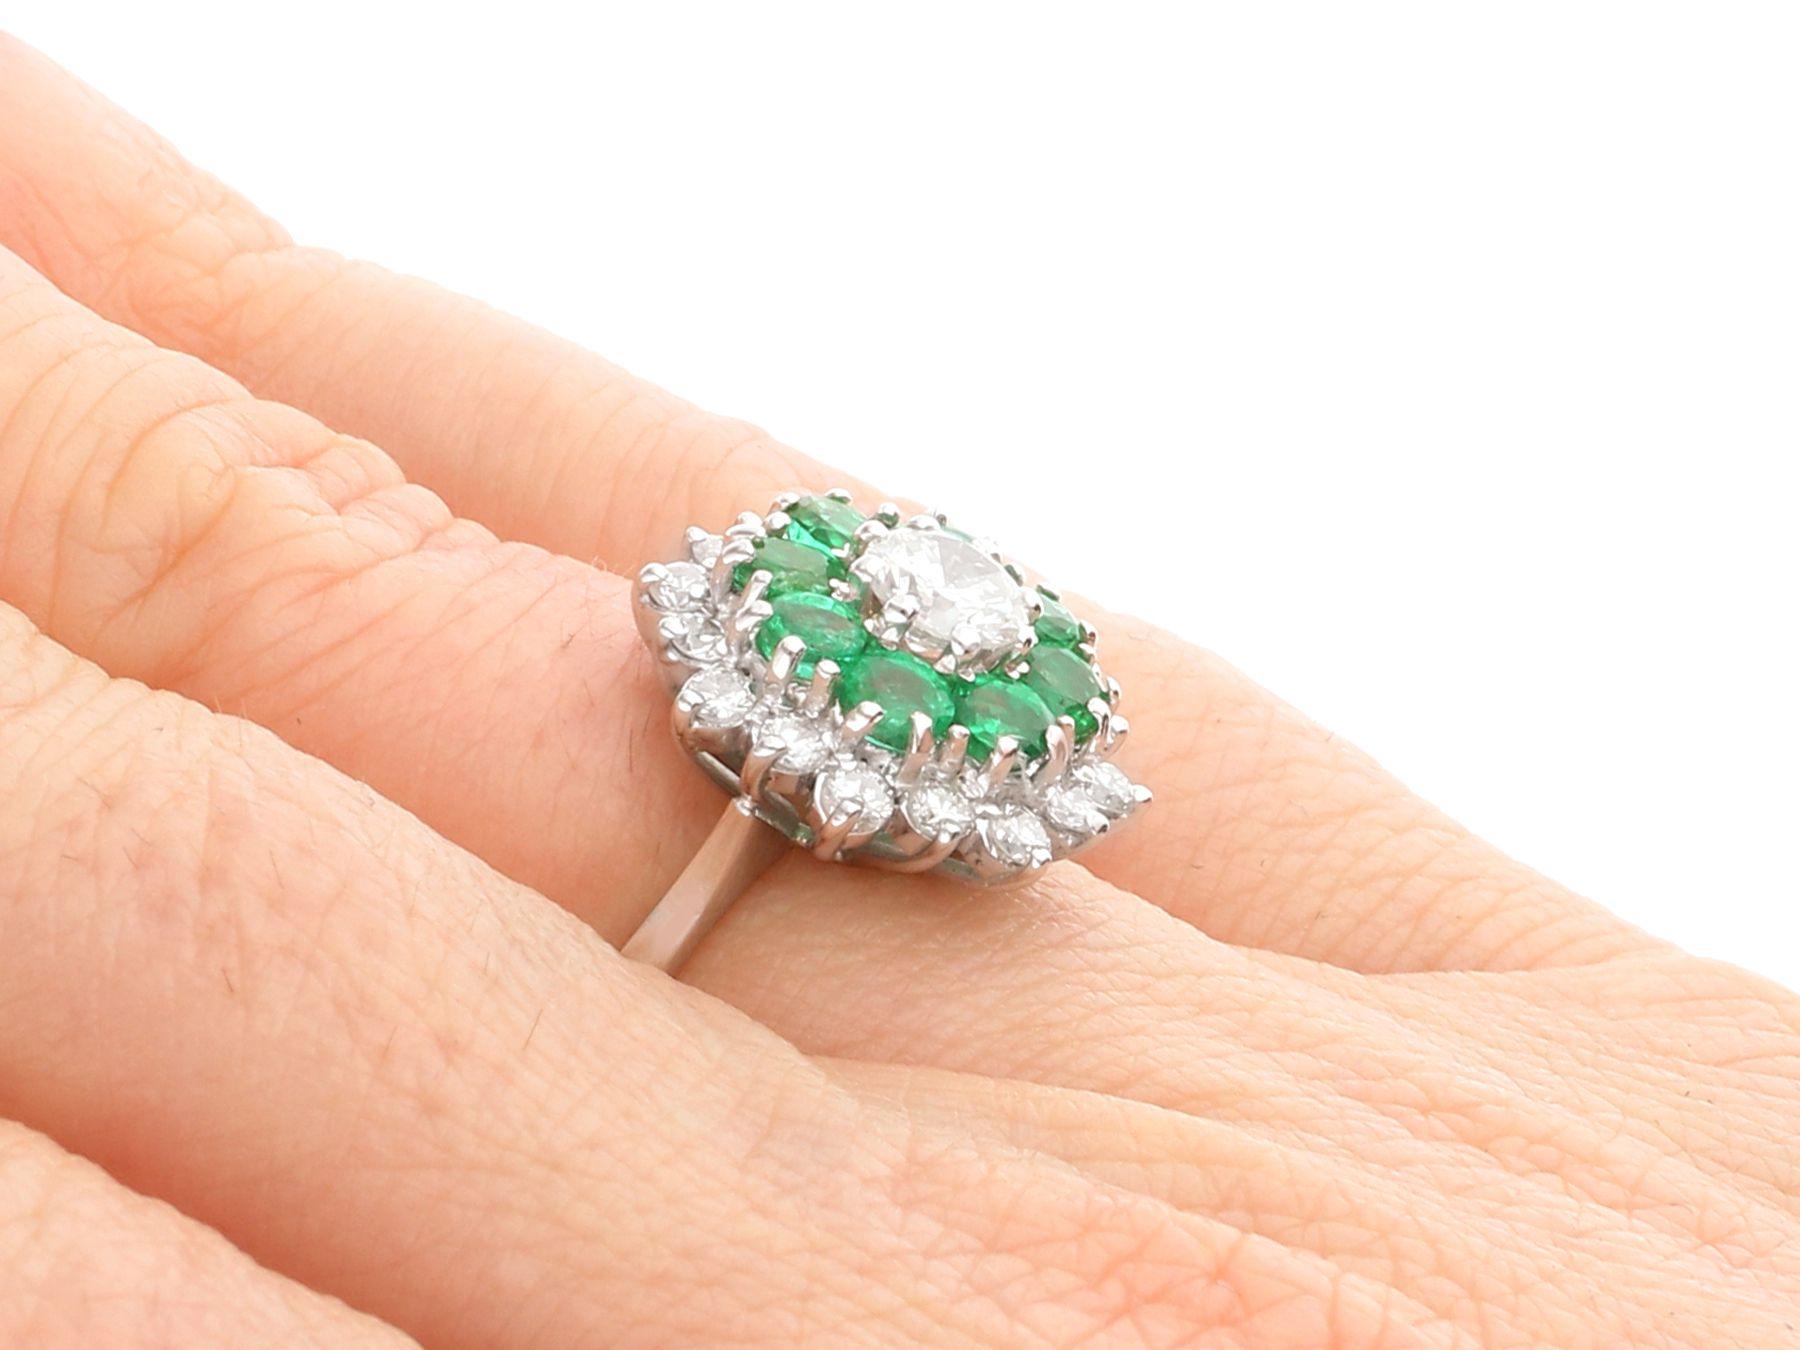 Vintage 1.23 Carat Diamond and Emerald White Gold Cocktail Ring, Circa 1970 For Sale 2